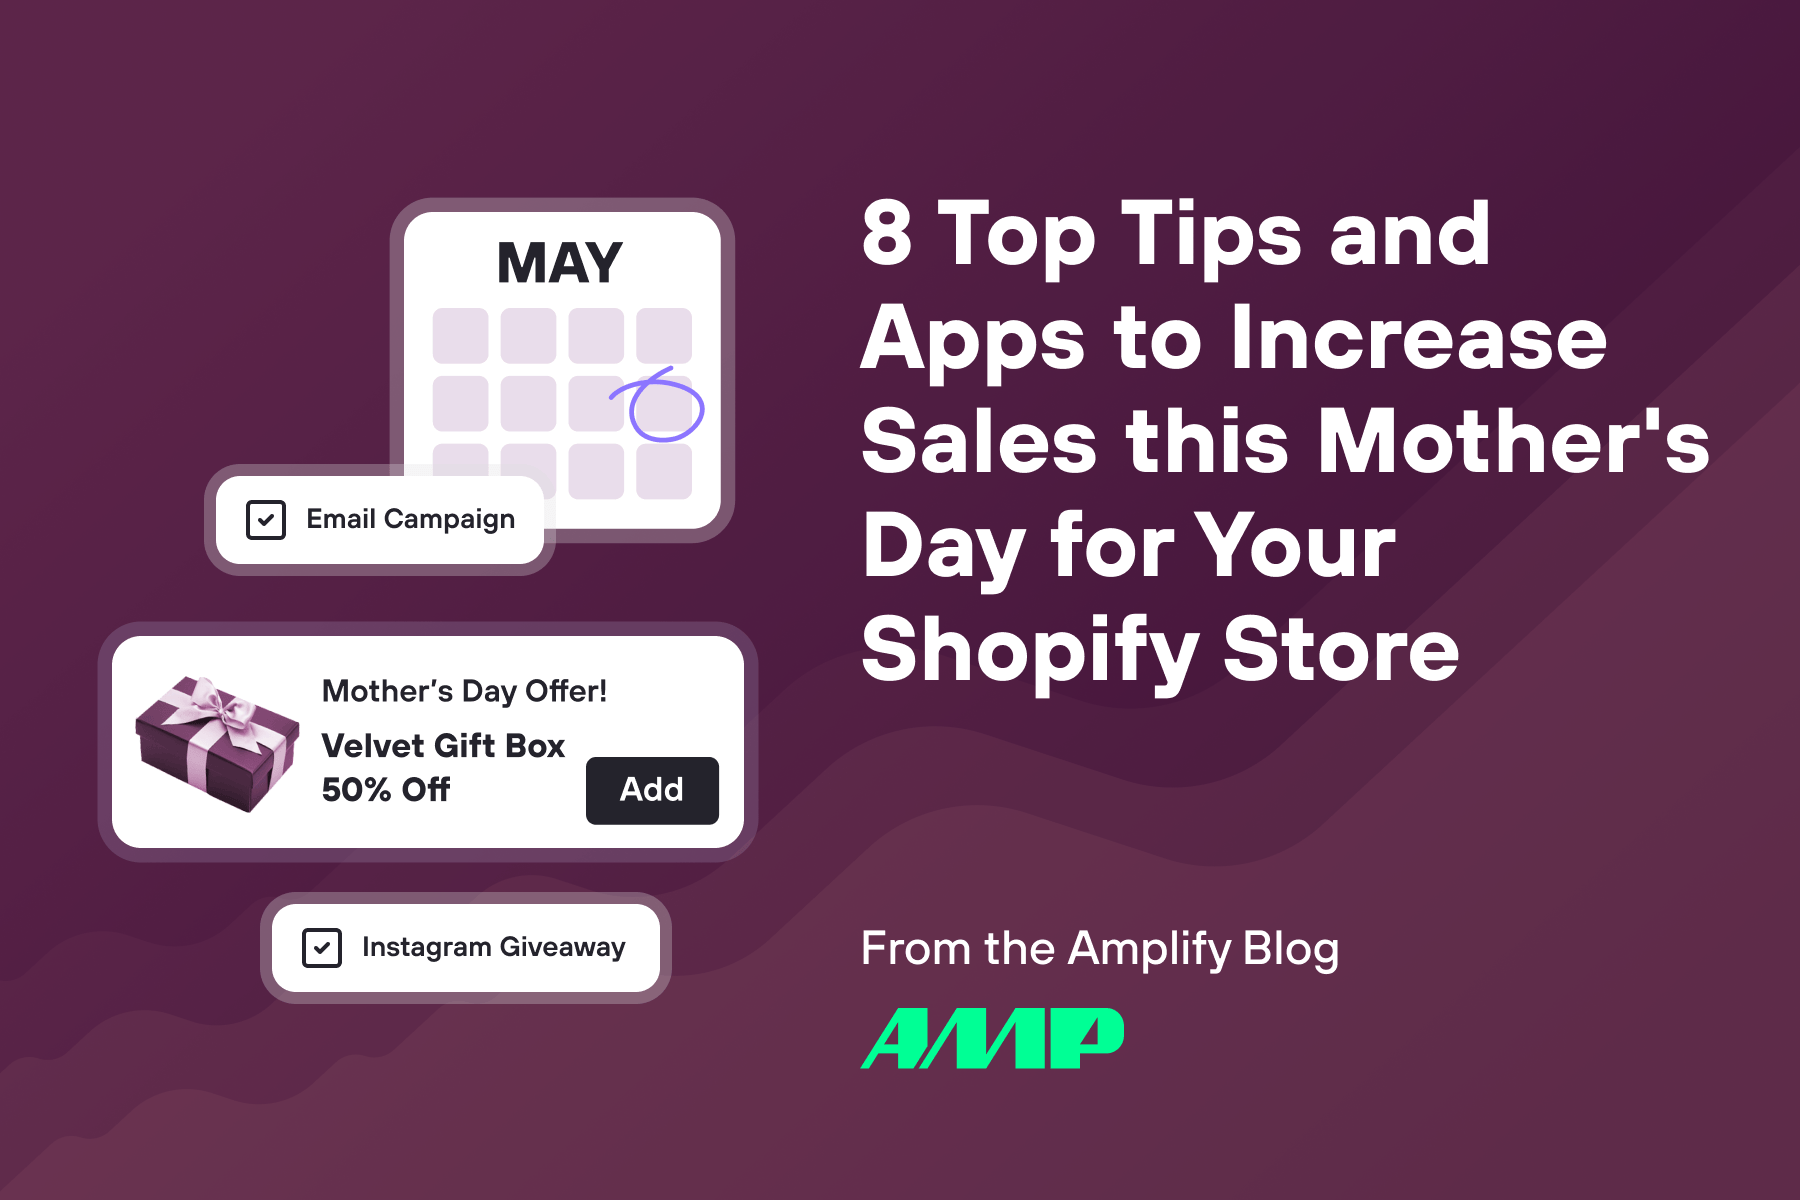 Increase-Sales-This-Mothers-Day-for-Your-Shopify-Store-1